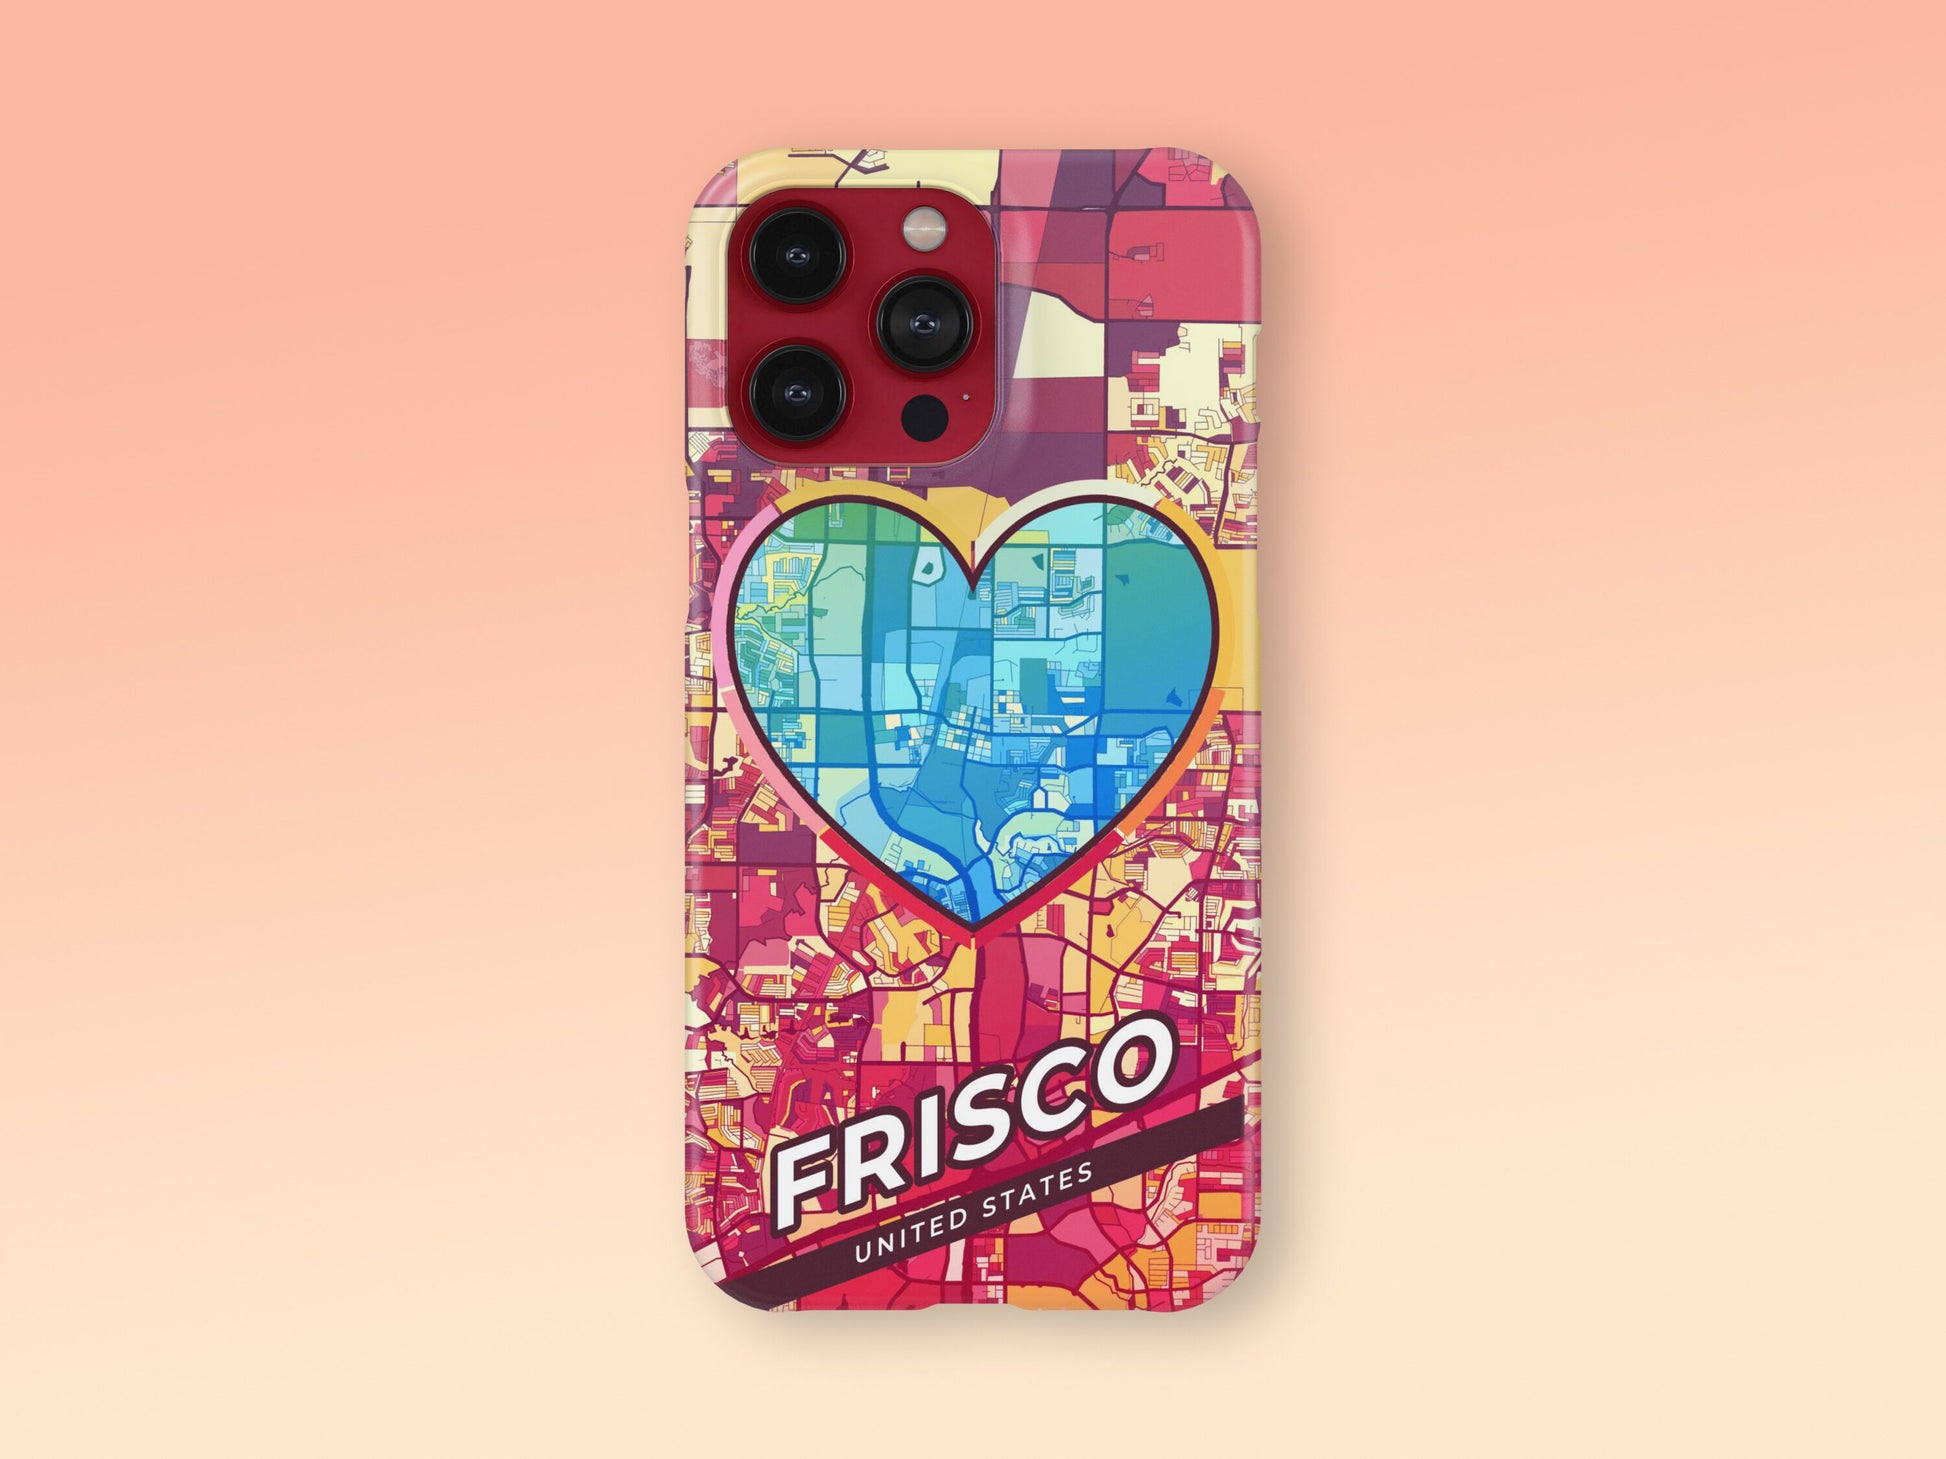 Frisco Texas slim phone case with colorful icon. Birthday, wedding or housewarming gift. Couple match cases. 2